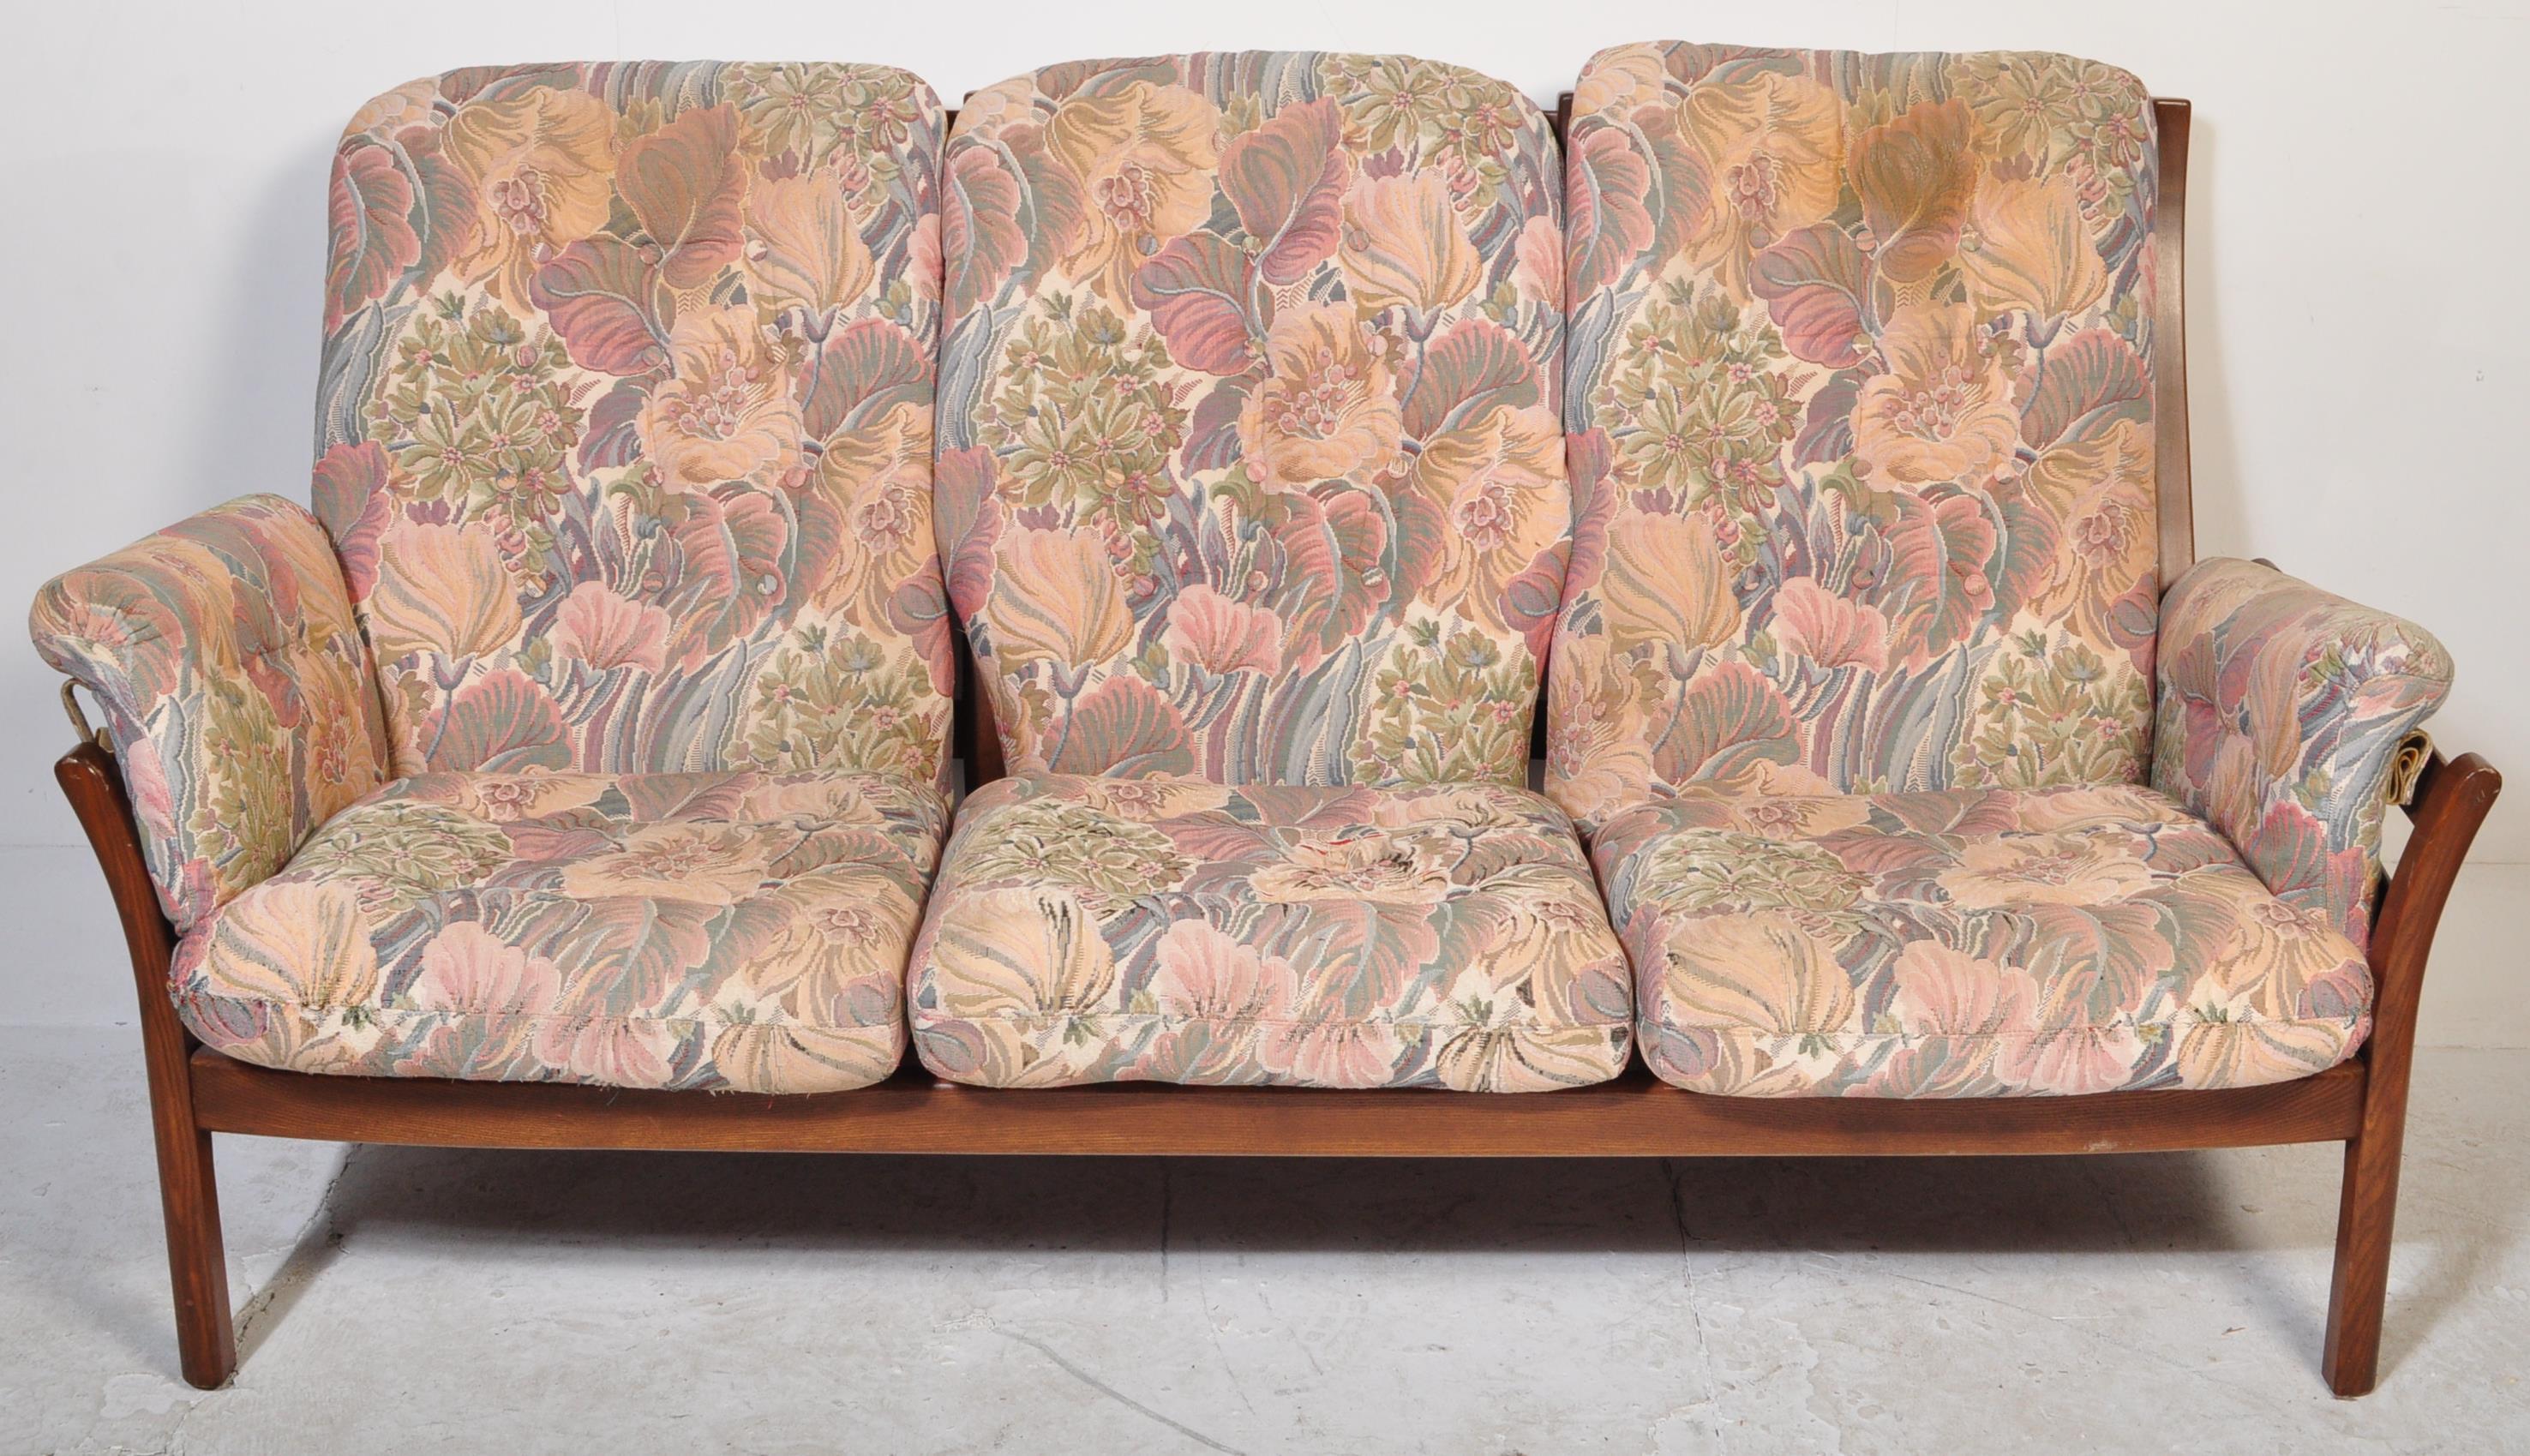 ERCOL RENAISSANCE ARMCHAIRS AND SOFA - THREE PIECE SUITE - Image 2 of 6